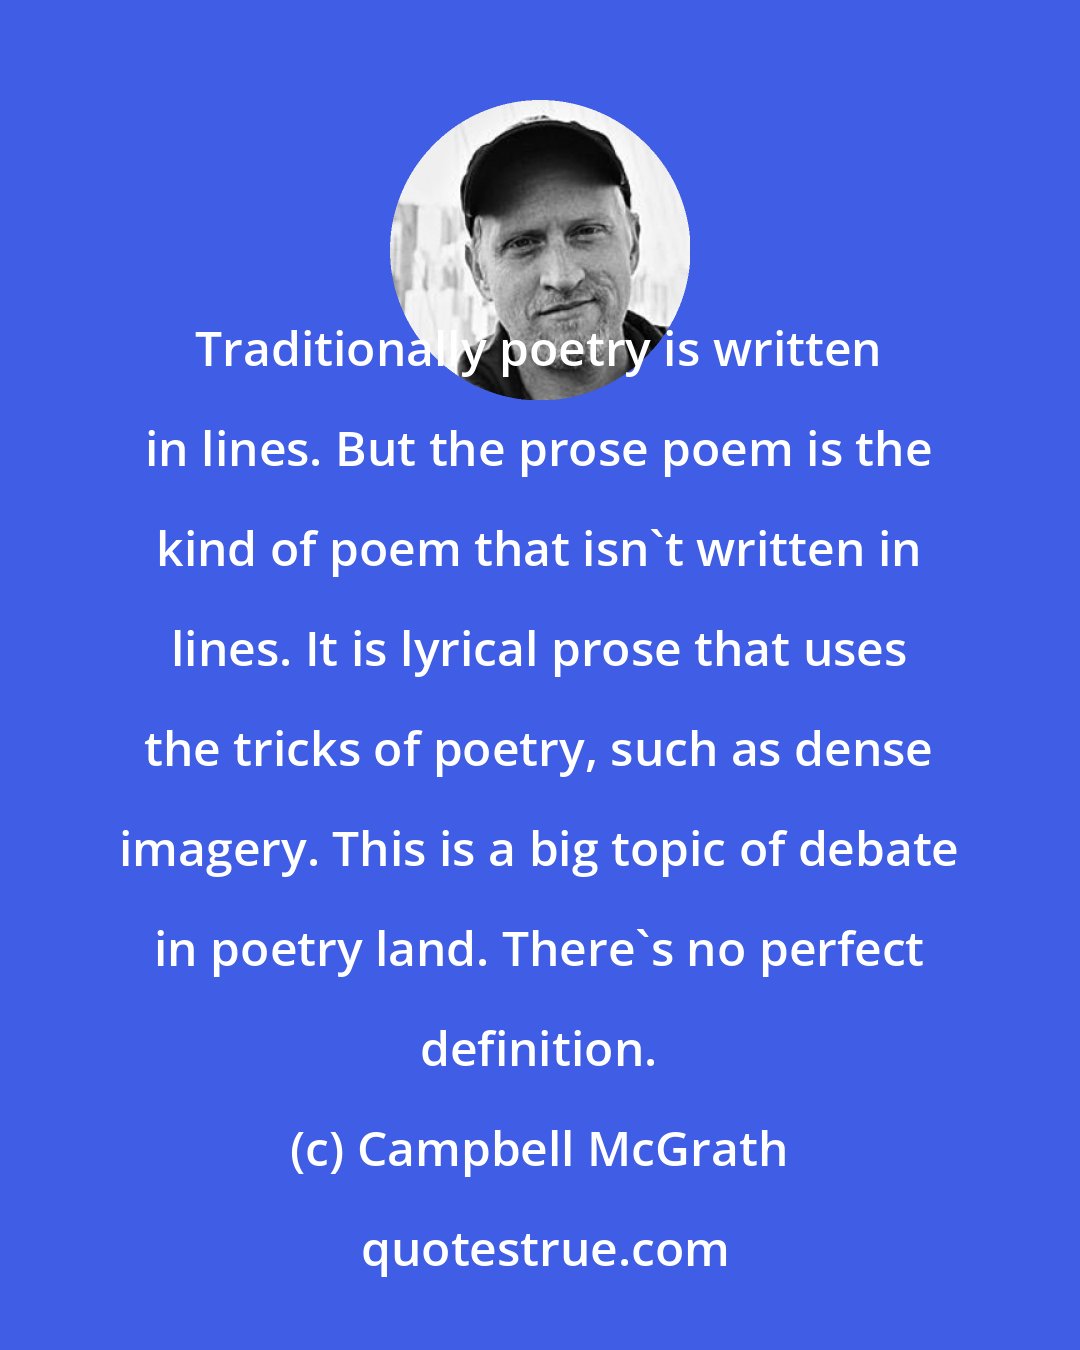 Campbell McGrath: Traditionally poetry is written in lines. But the prose poem is the kind of poem that isn't written in lines. It is lyrical prose that uses the tricks of poetry, such as dense imagery. This is a big topic of debate in poetry land. There's no perfect definition.